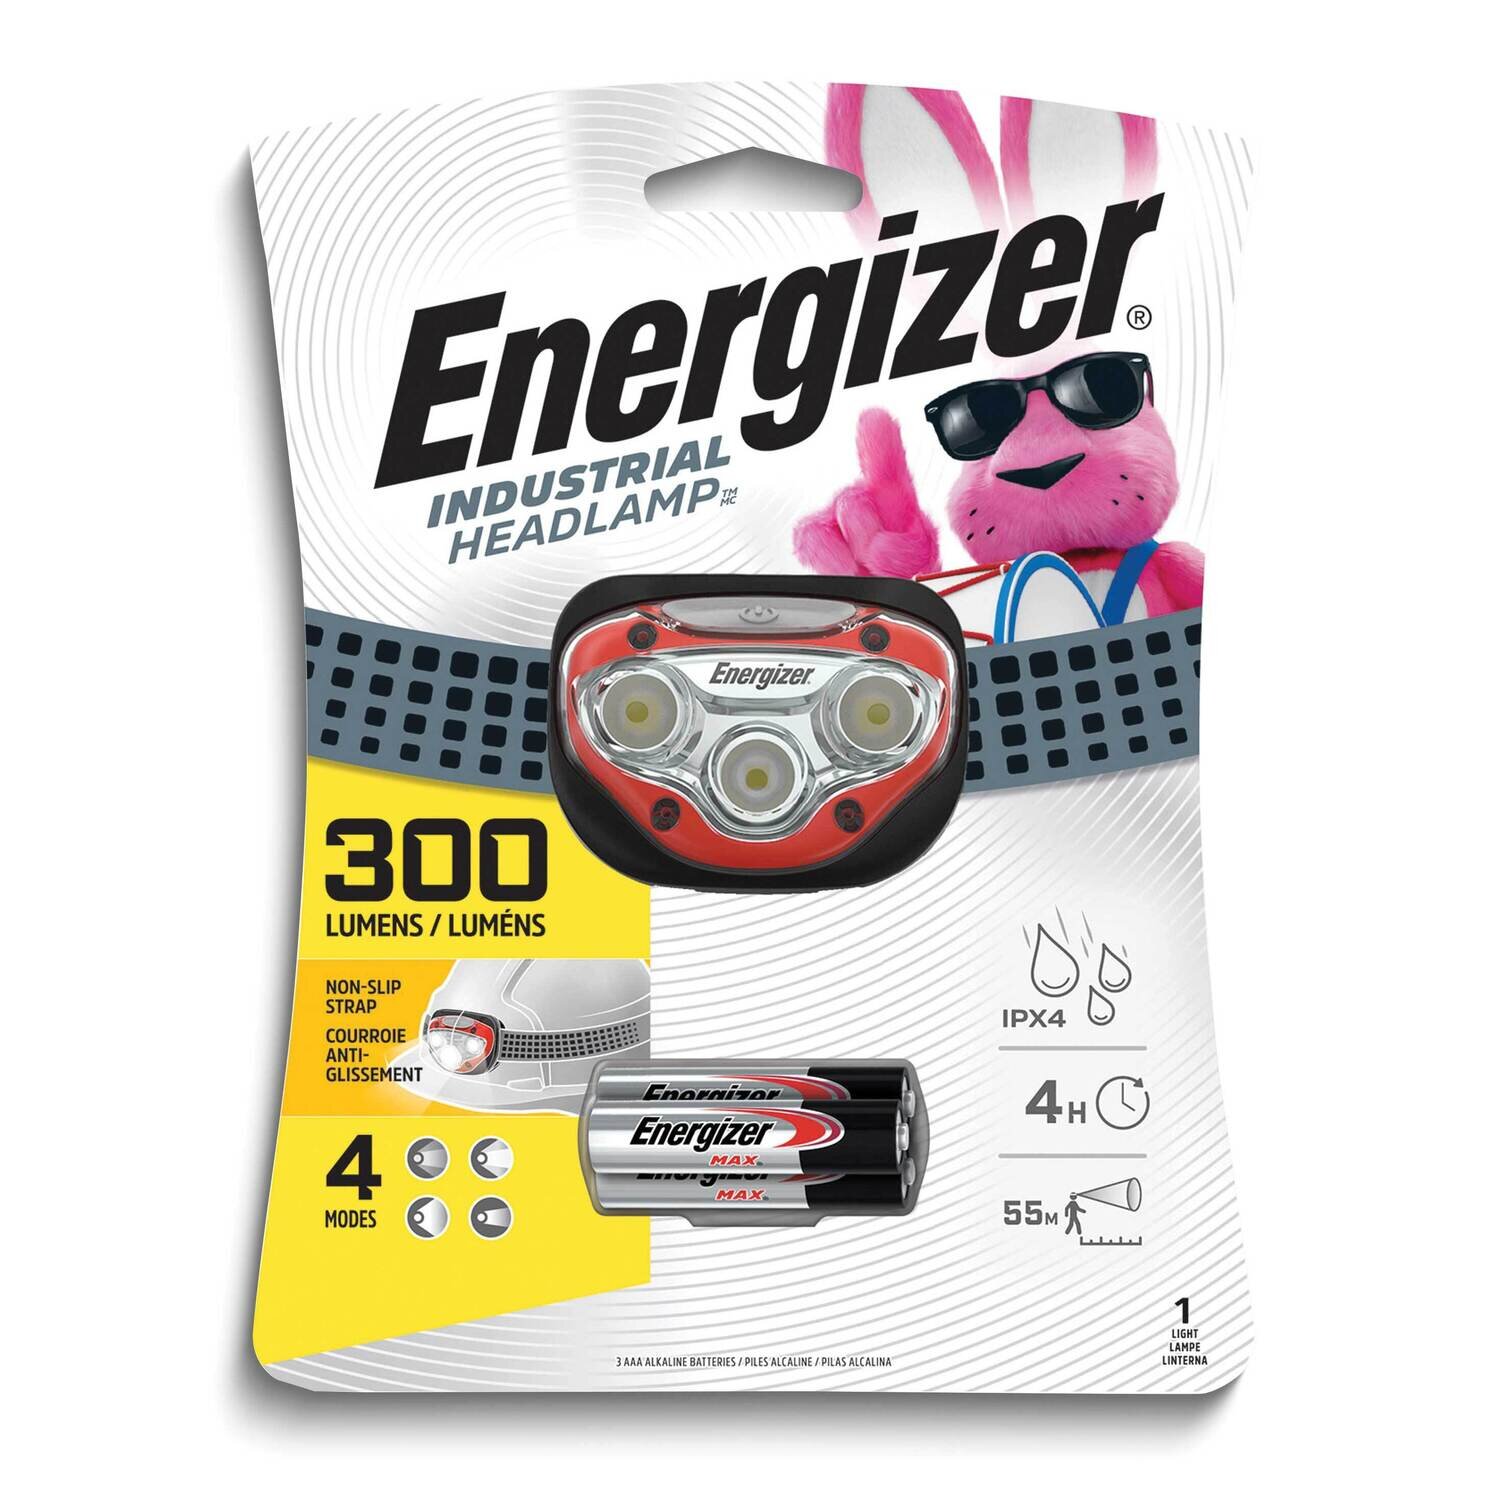 Energizer Industrial LED 300 Lumens Headlamp with 3 Energizer AAA Batteries JT5349